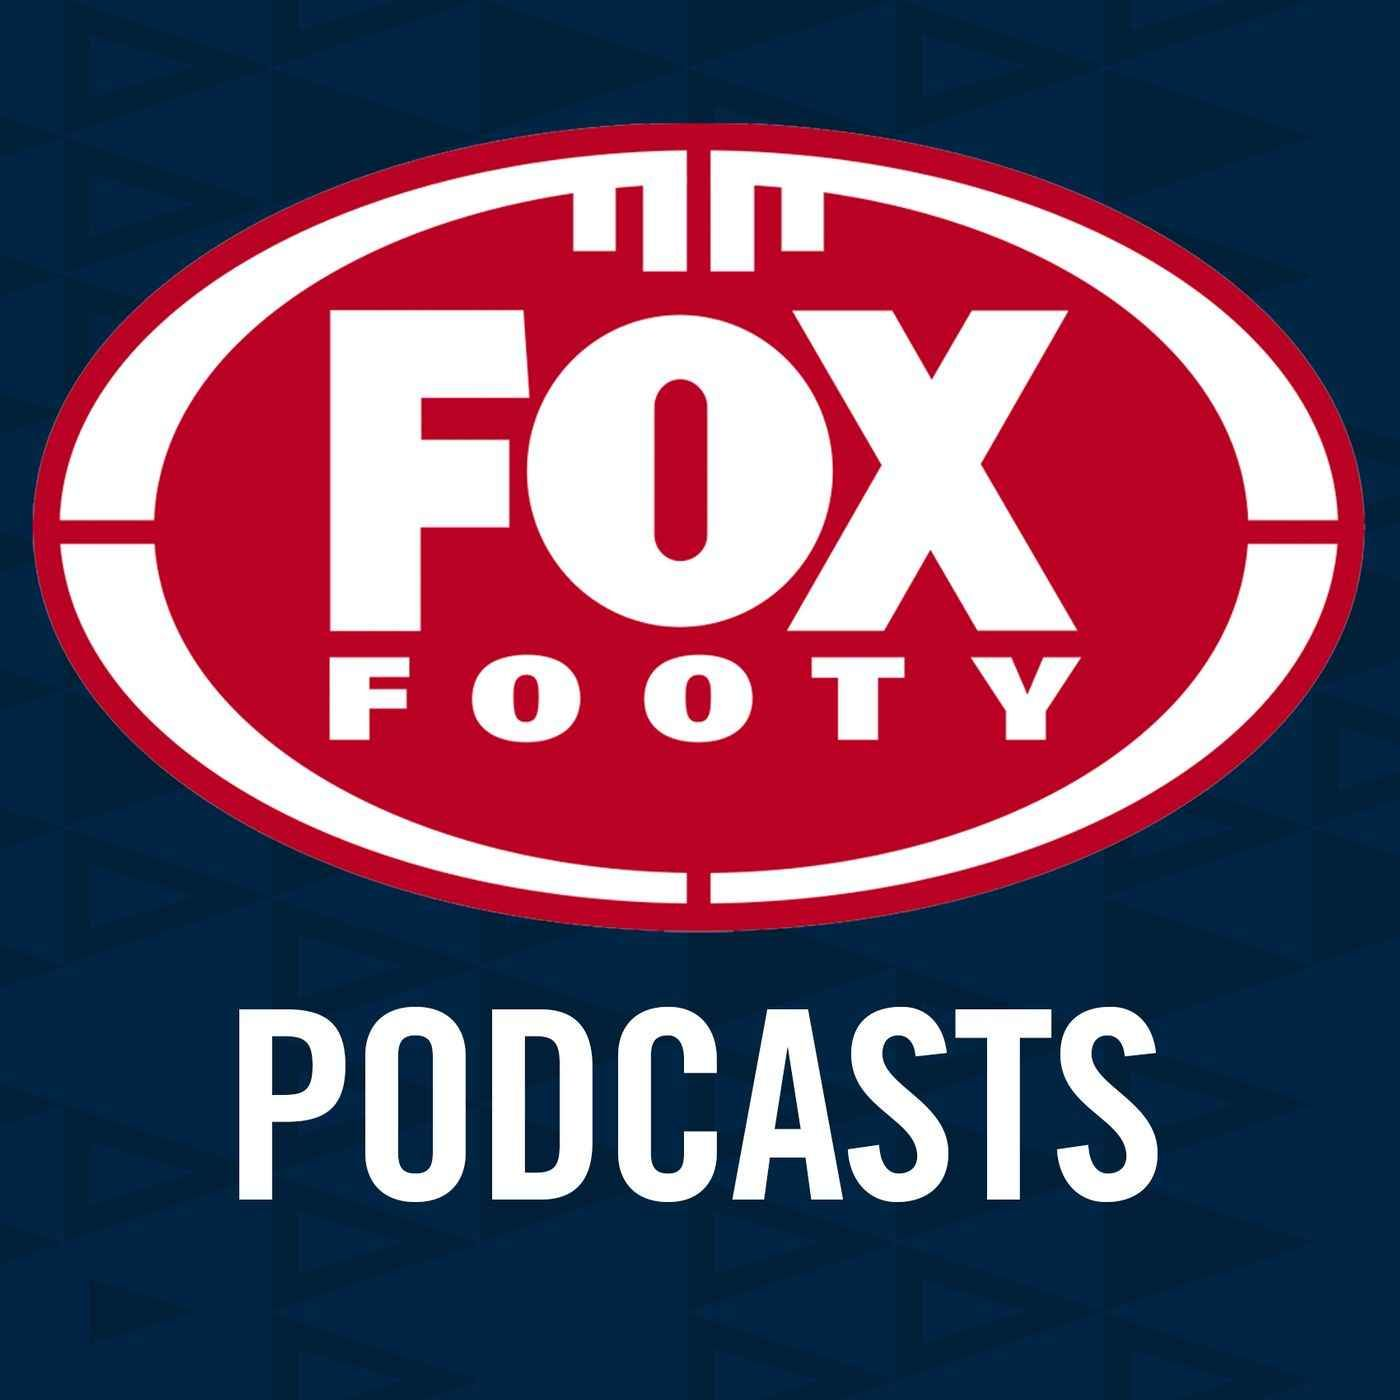 Fox Footy Live: Mark Ricciuto joins the panel to discuss what role he has played for the Crows and in the community